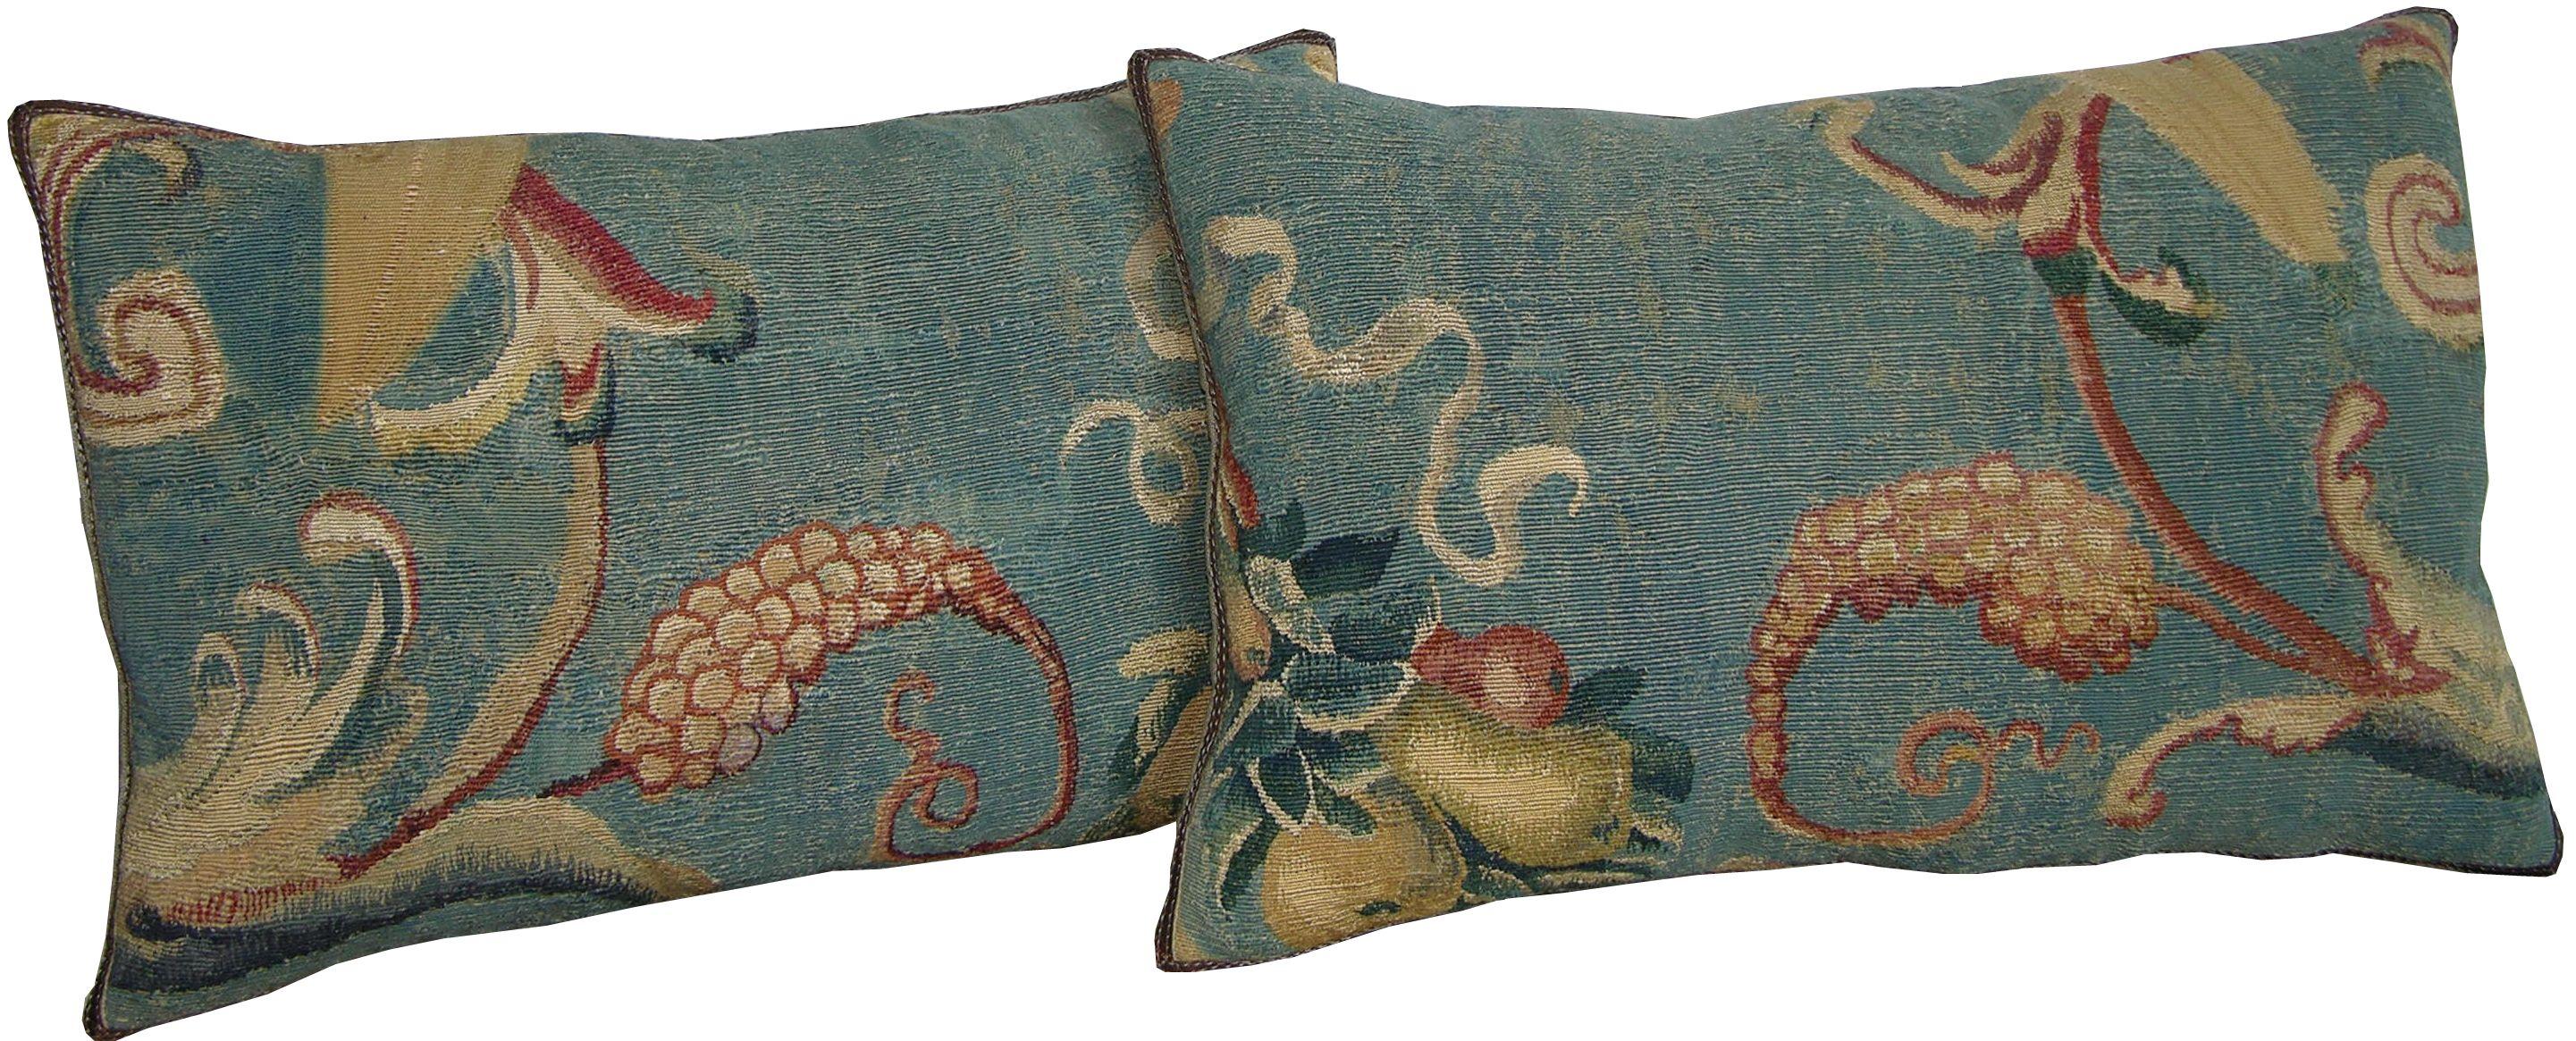 Pair of Antique French Aubusson Pillows circa 18th Century 1756p 1757p im Zustand „Gut“ im Angebot in Los Angeles, CA